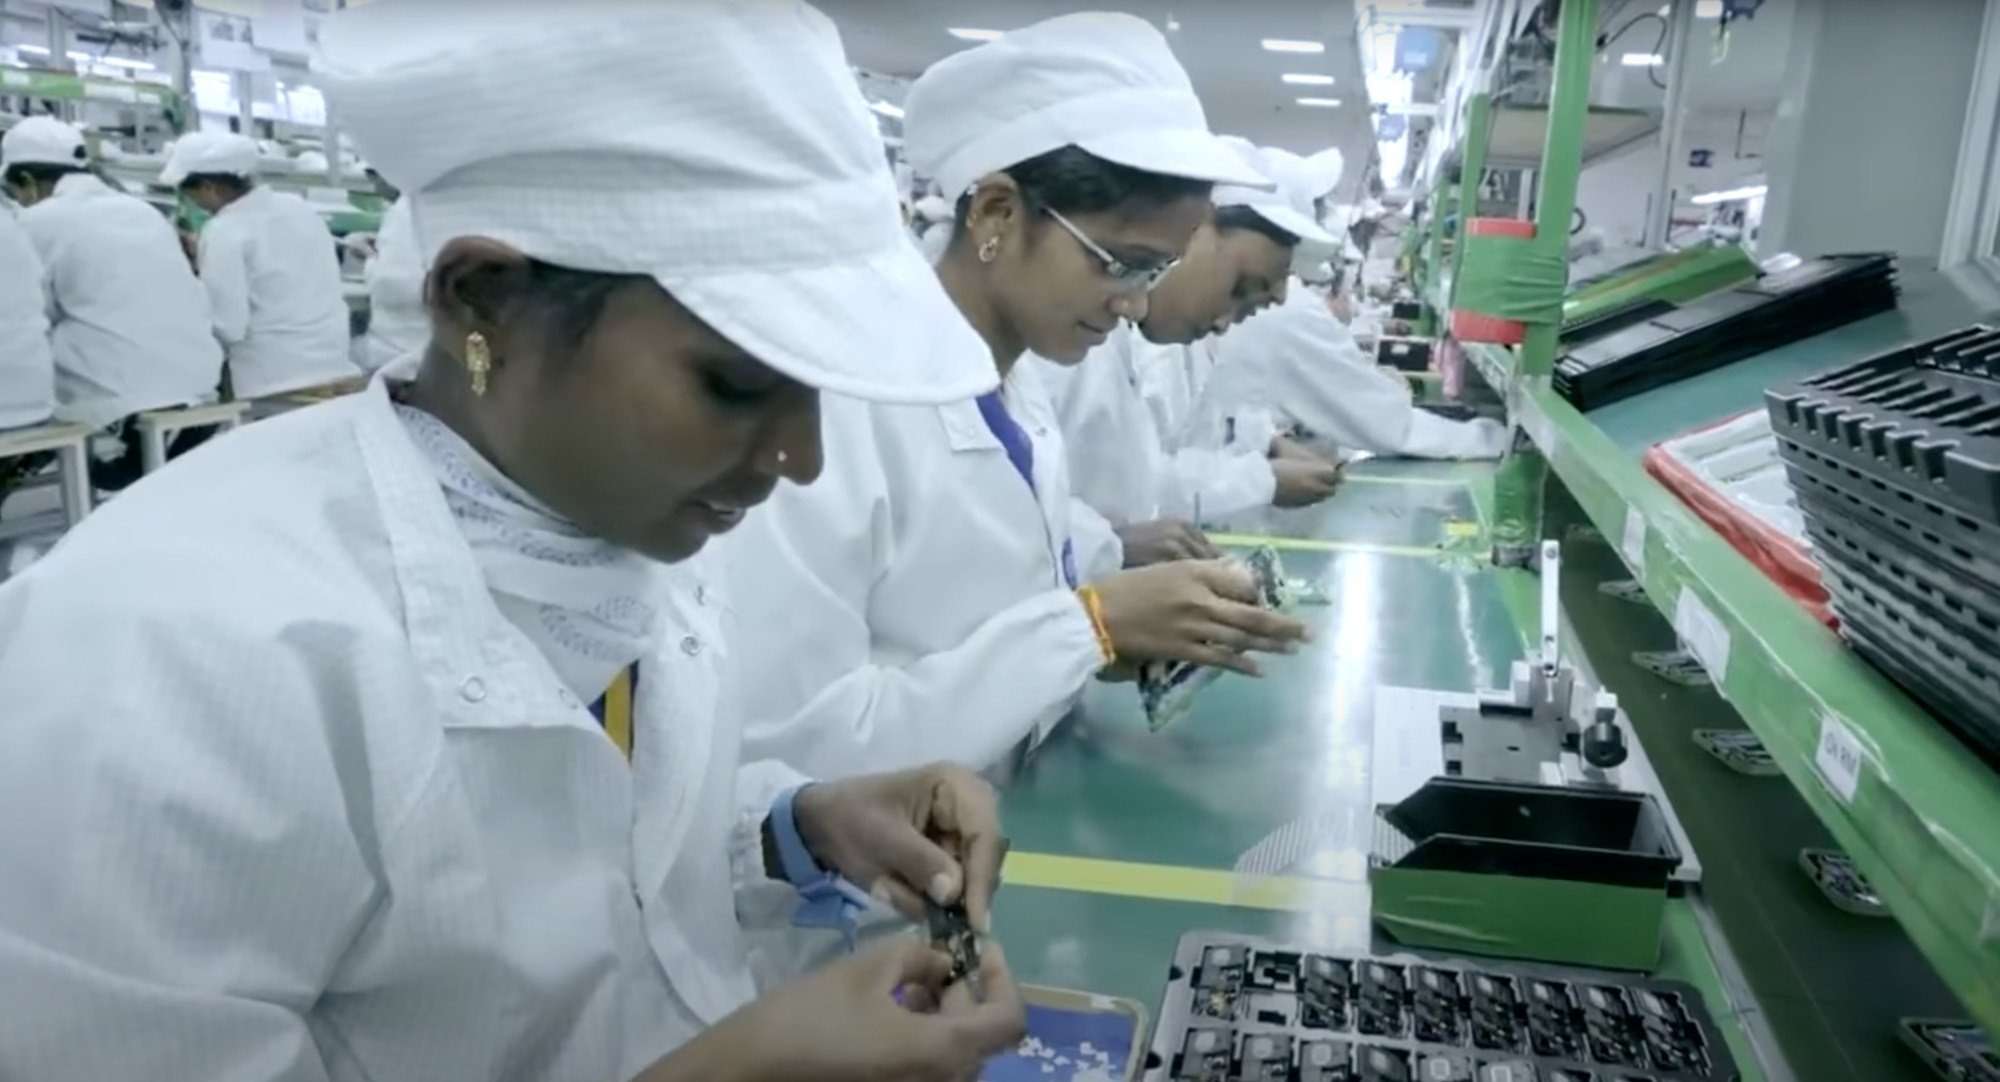 Boost for Make in India: GoI approves subsidies for Foxconn, Lenovo, other hardware firms under PLI scheme